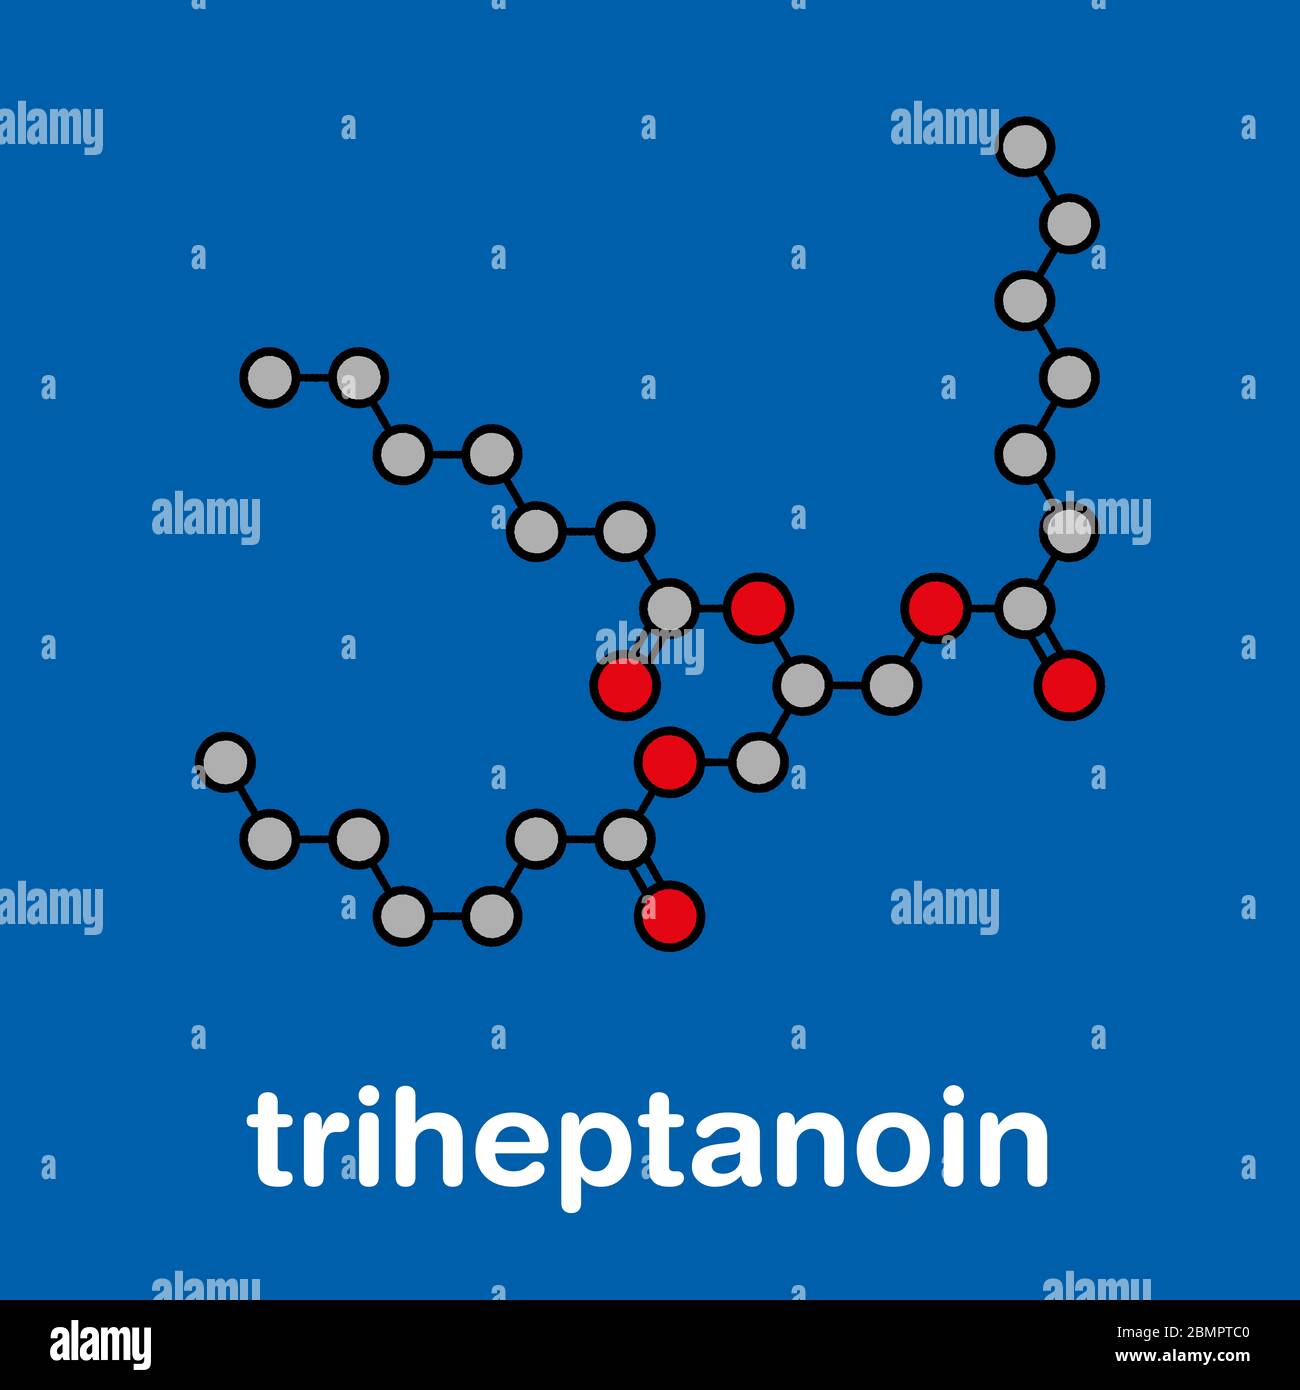 Triheptanoin drug molecule. Stylized skeletal formula (chemical structure): Atoms are shown as color-coded circles: hydrogen (hidden), carbon (grey), oxygen (red). Stock Photo